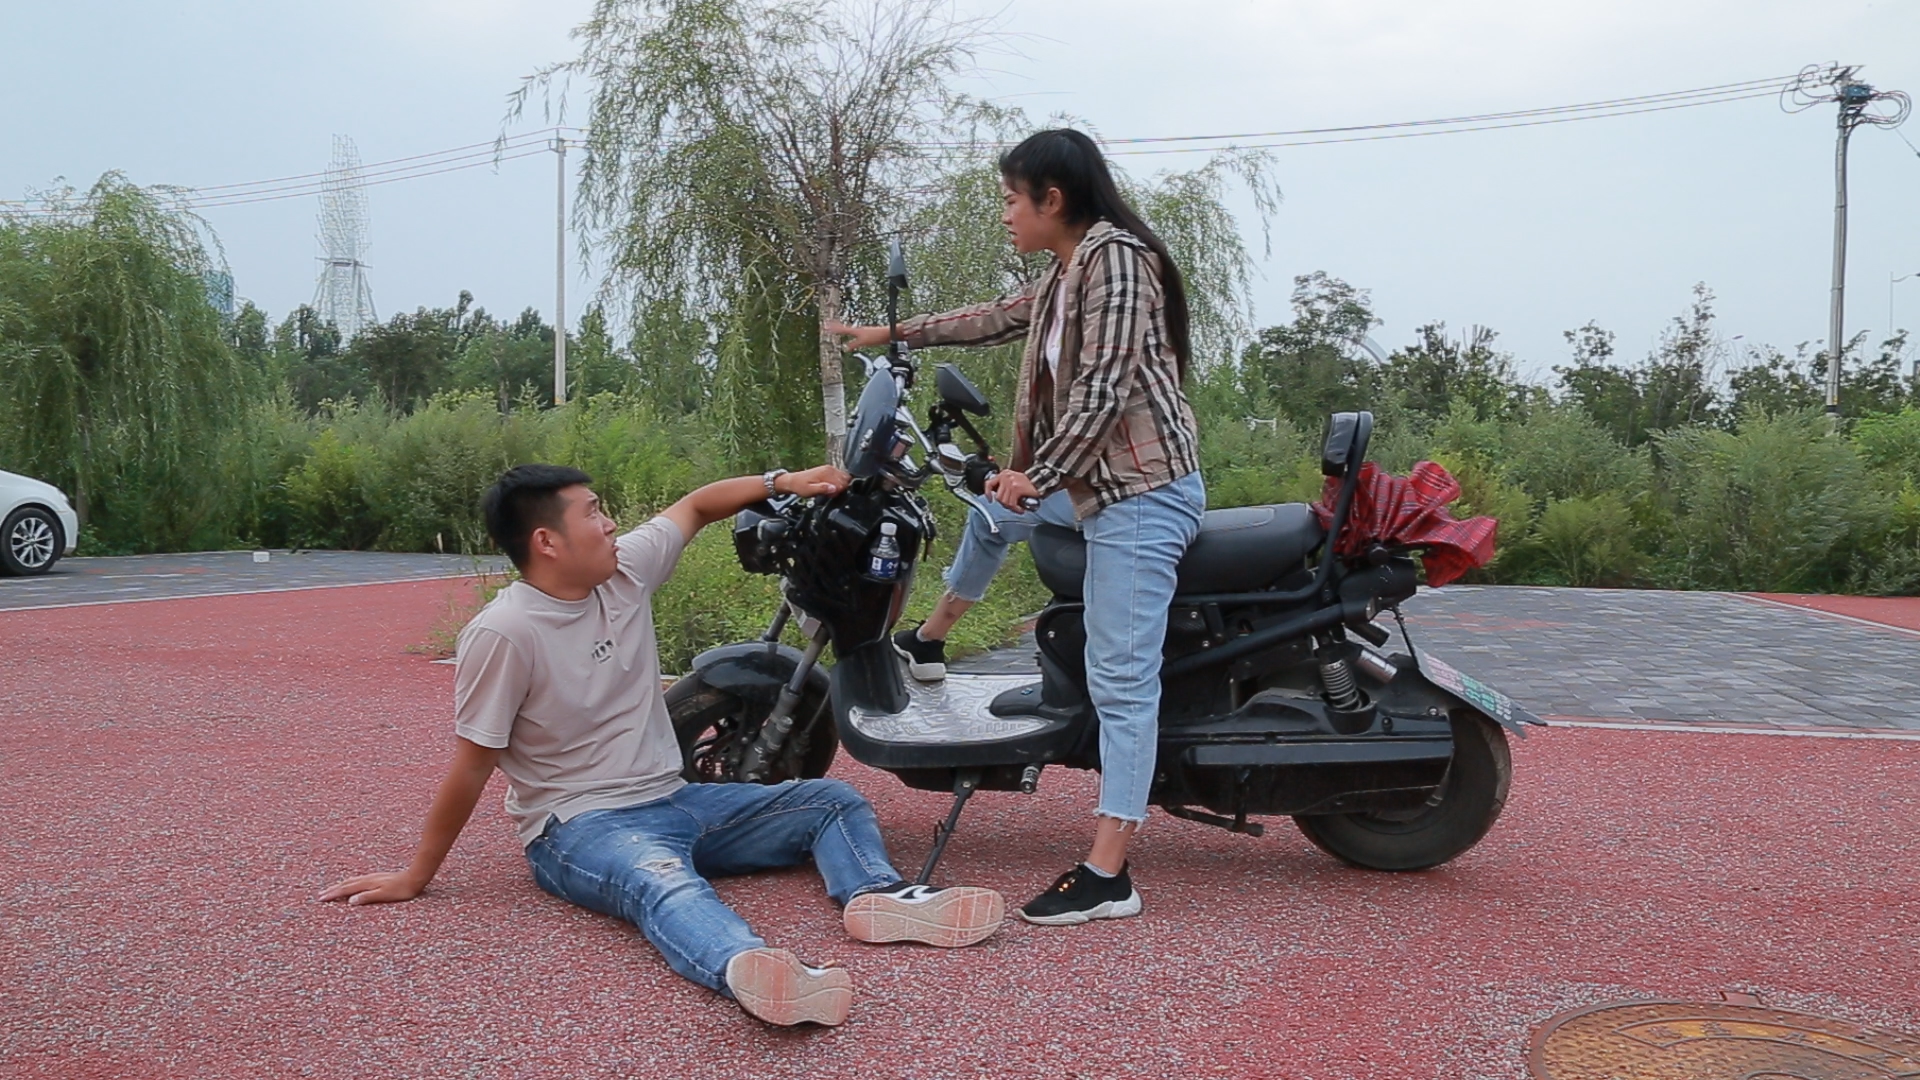 Second-class goods touched porcelain motorcycle, unexpectedly met a woman, the result was a fat beating, it's pitiful.